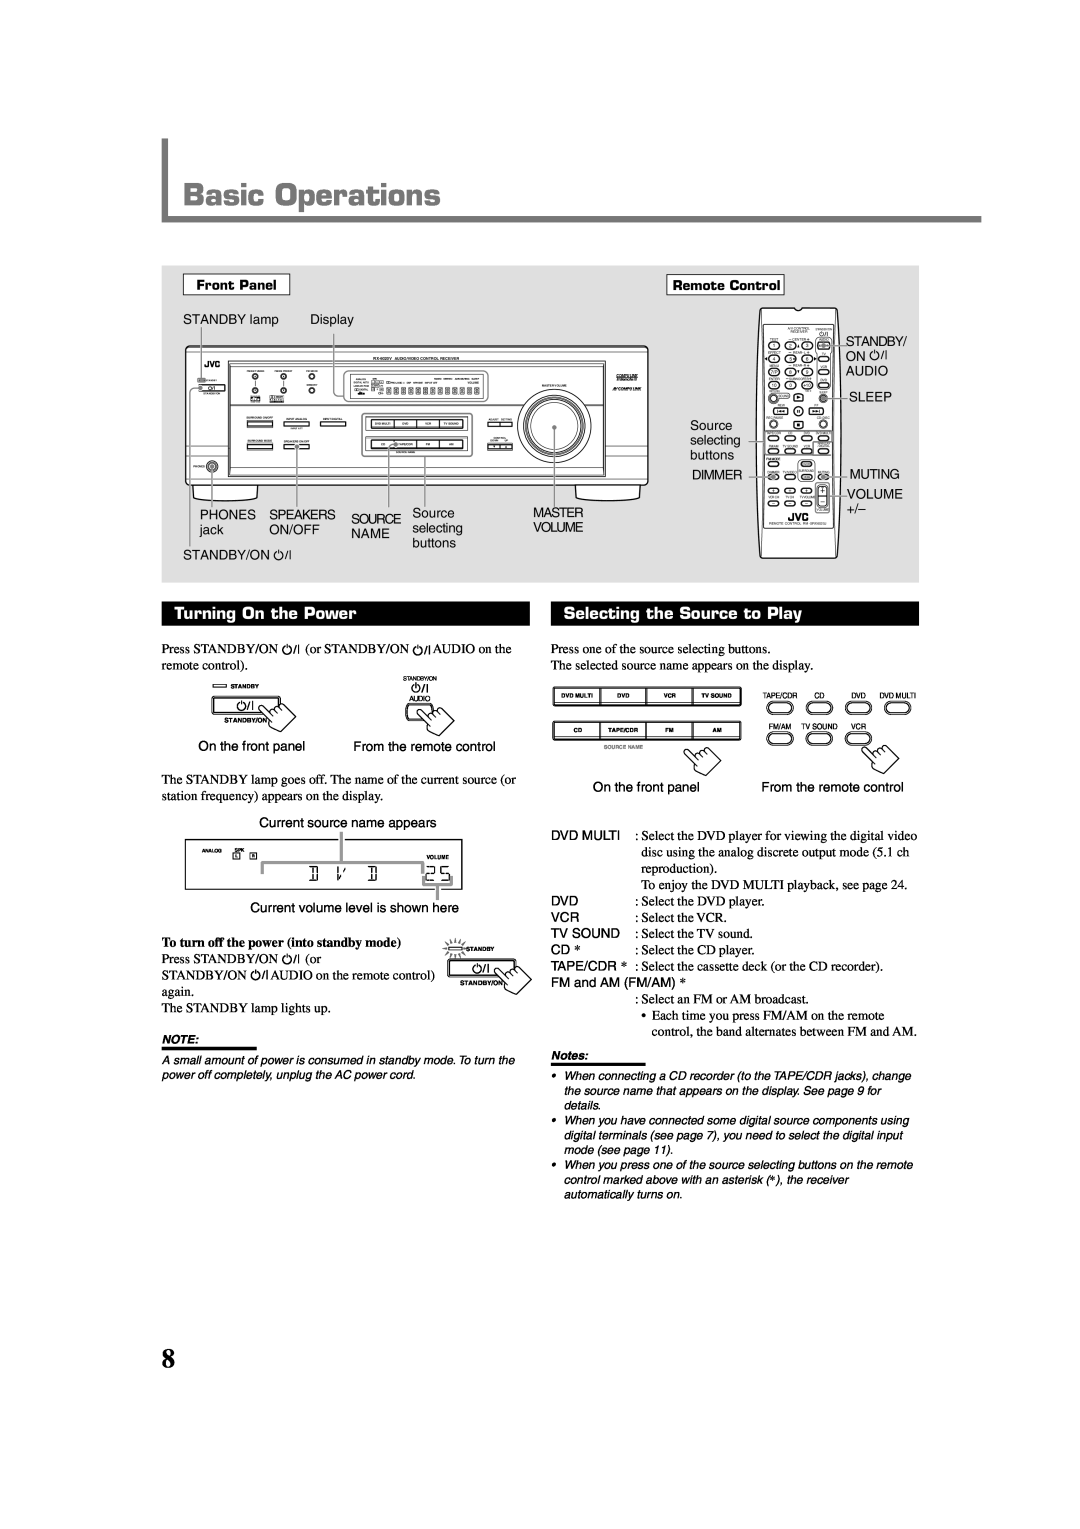 JVC RX-6022VSL manual Basic Operations, Turning On the Power, Selecting the Source to Play 